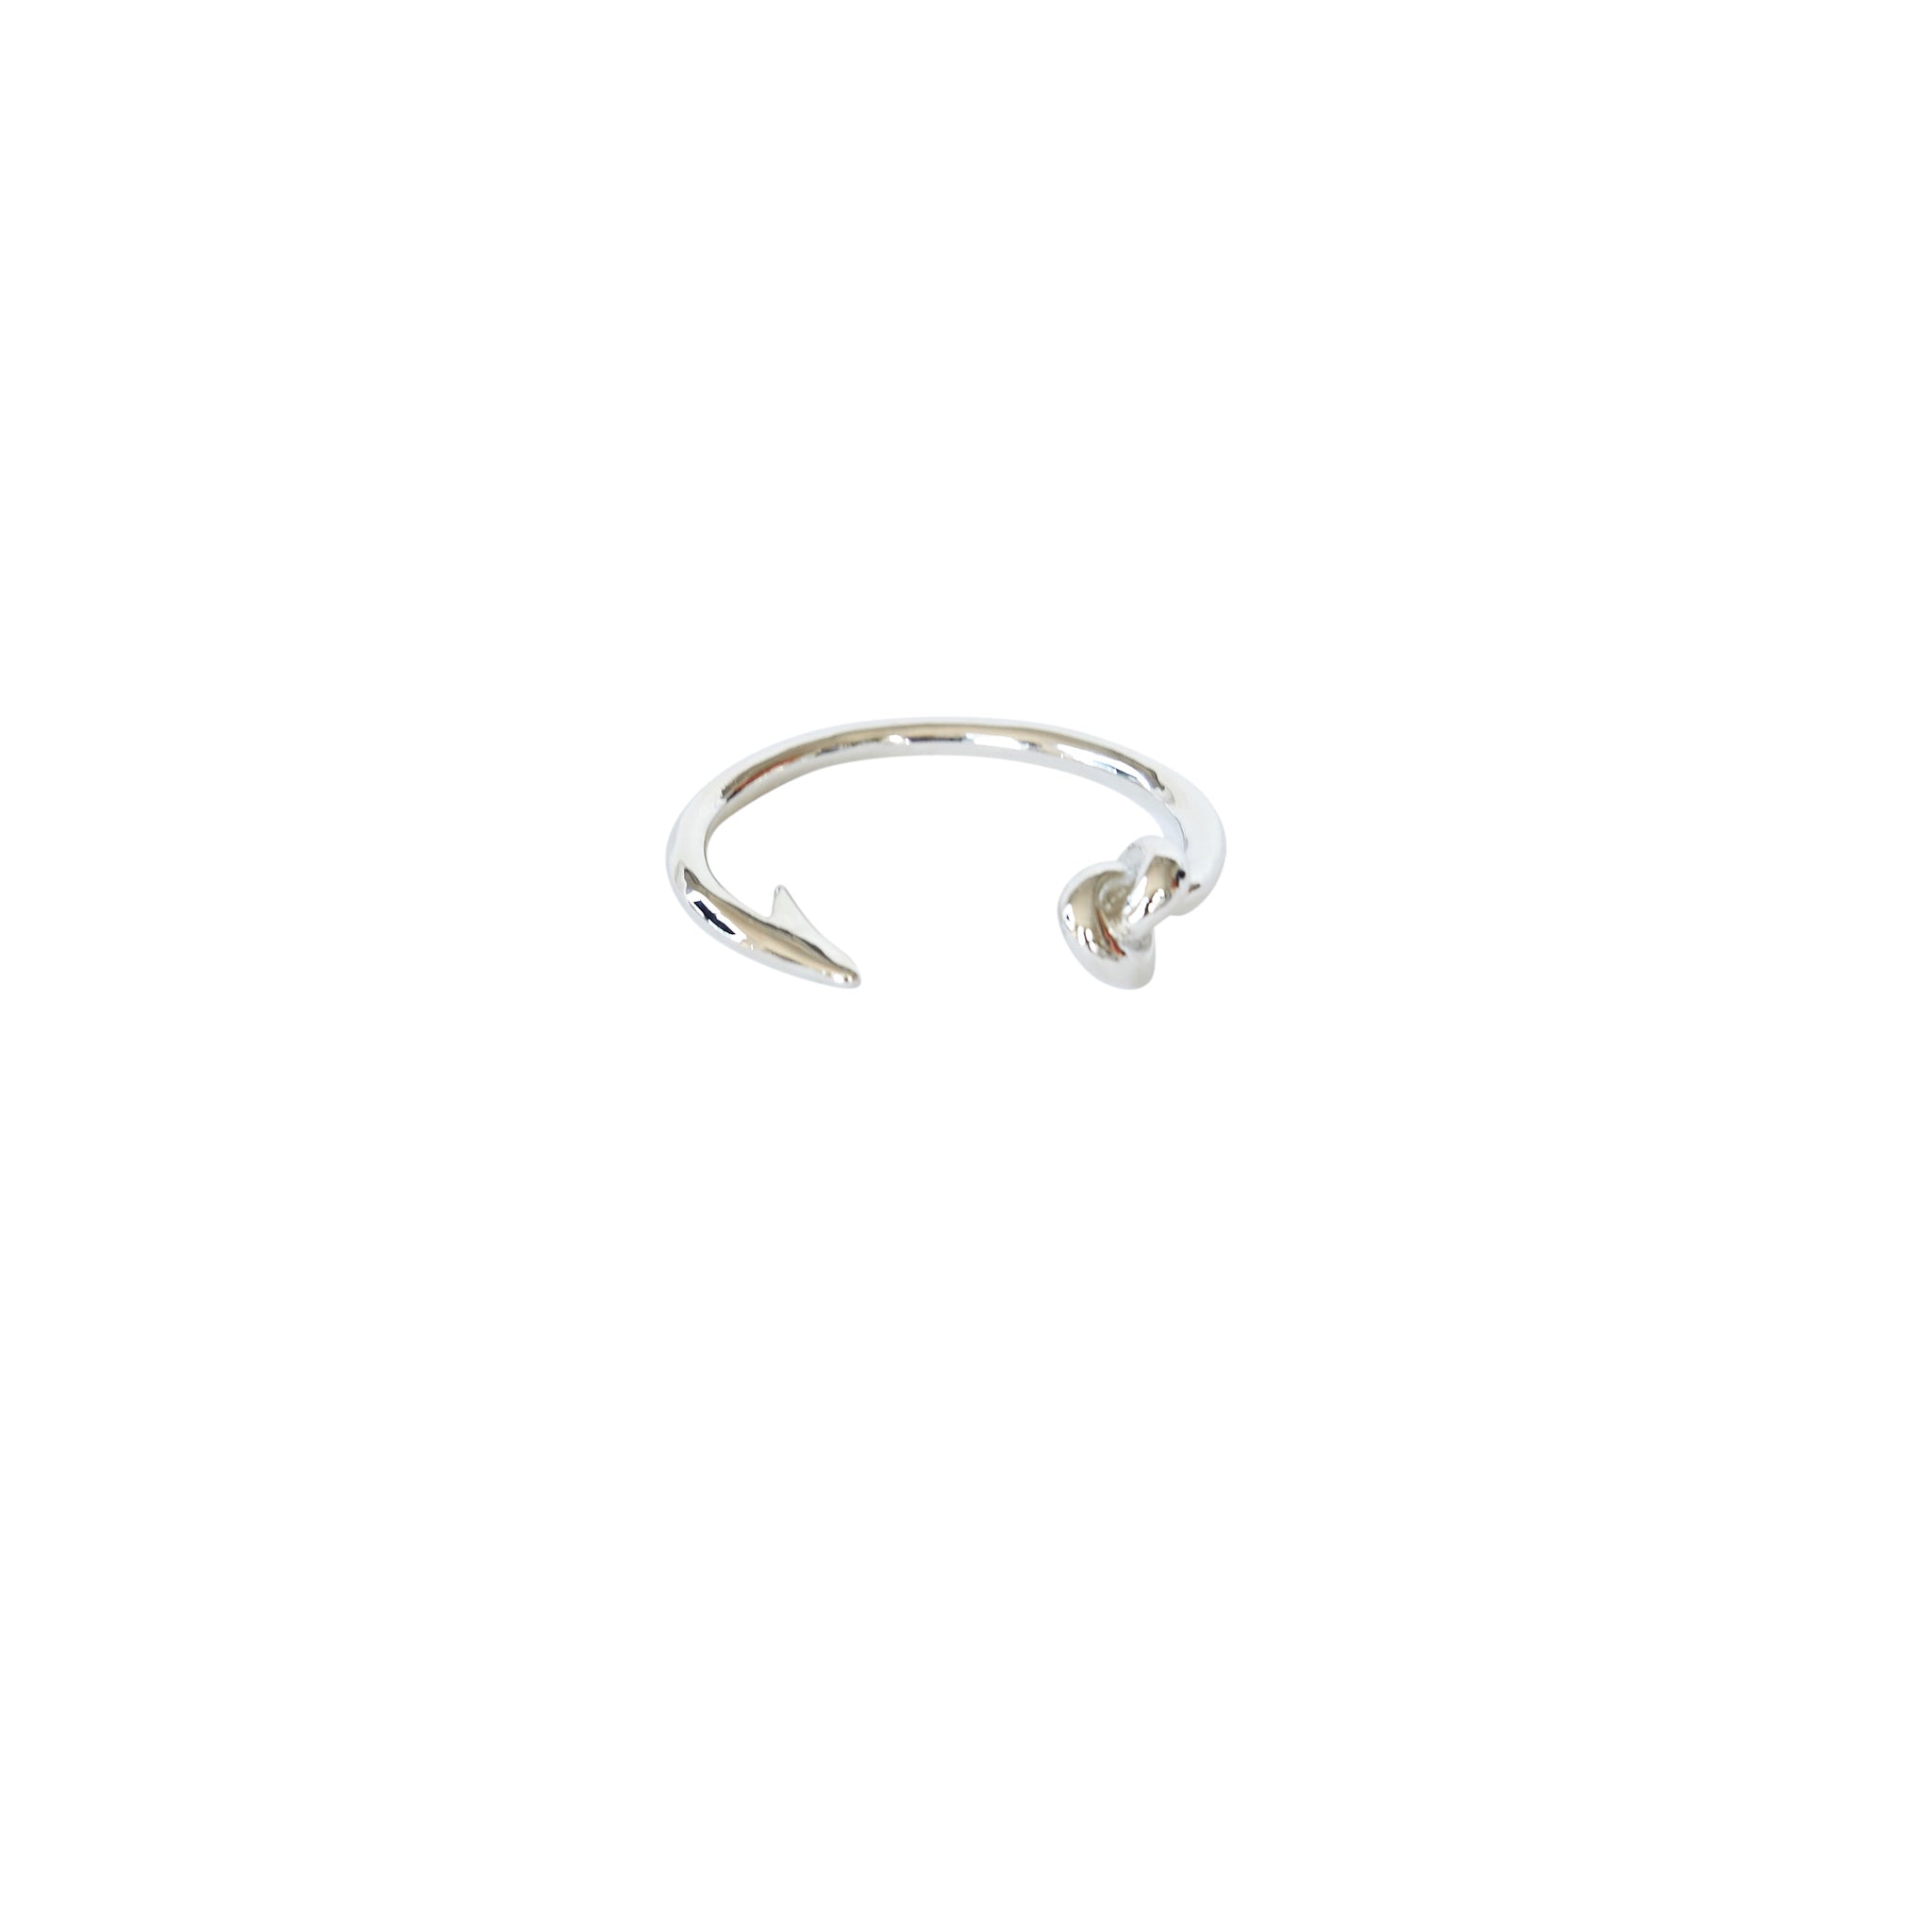 Hook and Knot Bangle in Silver